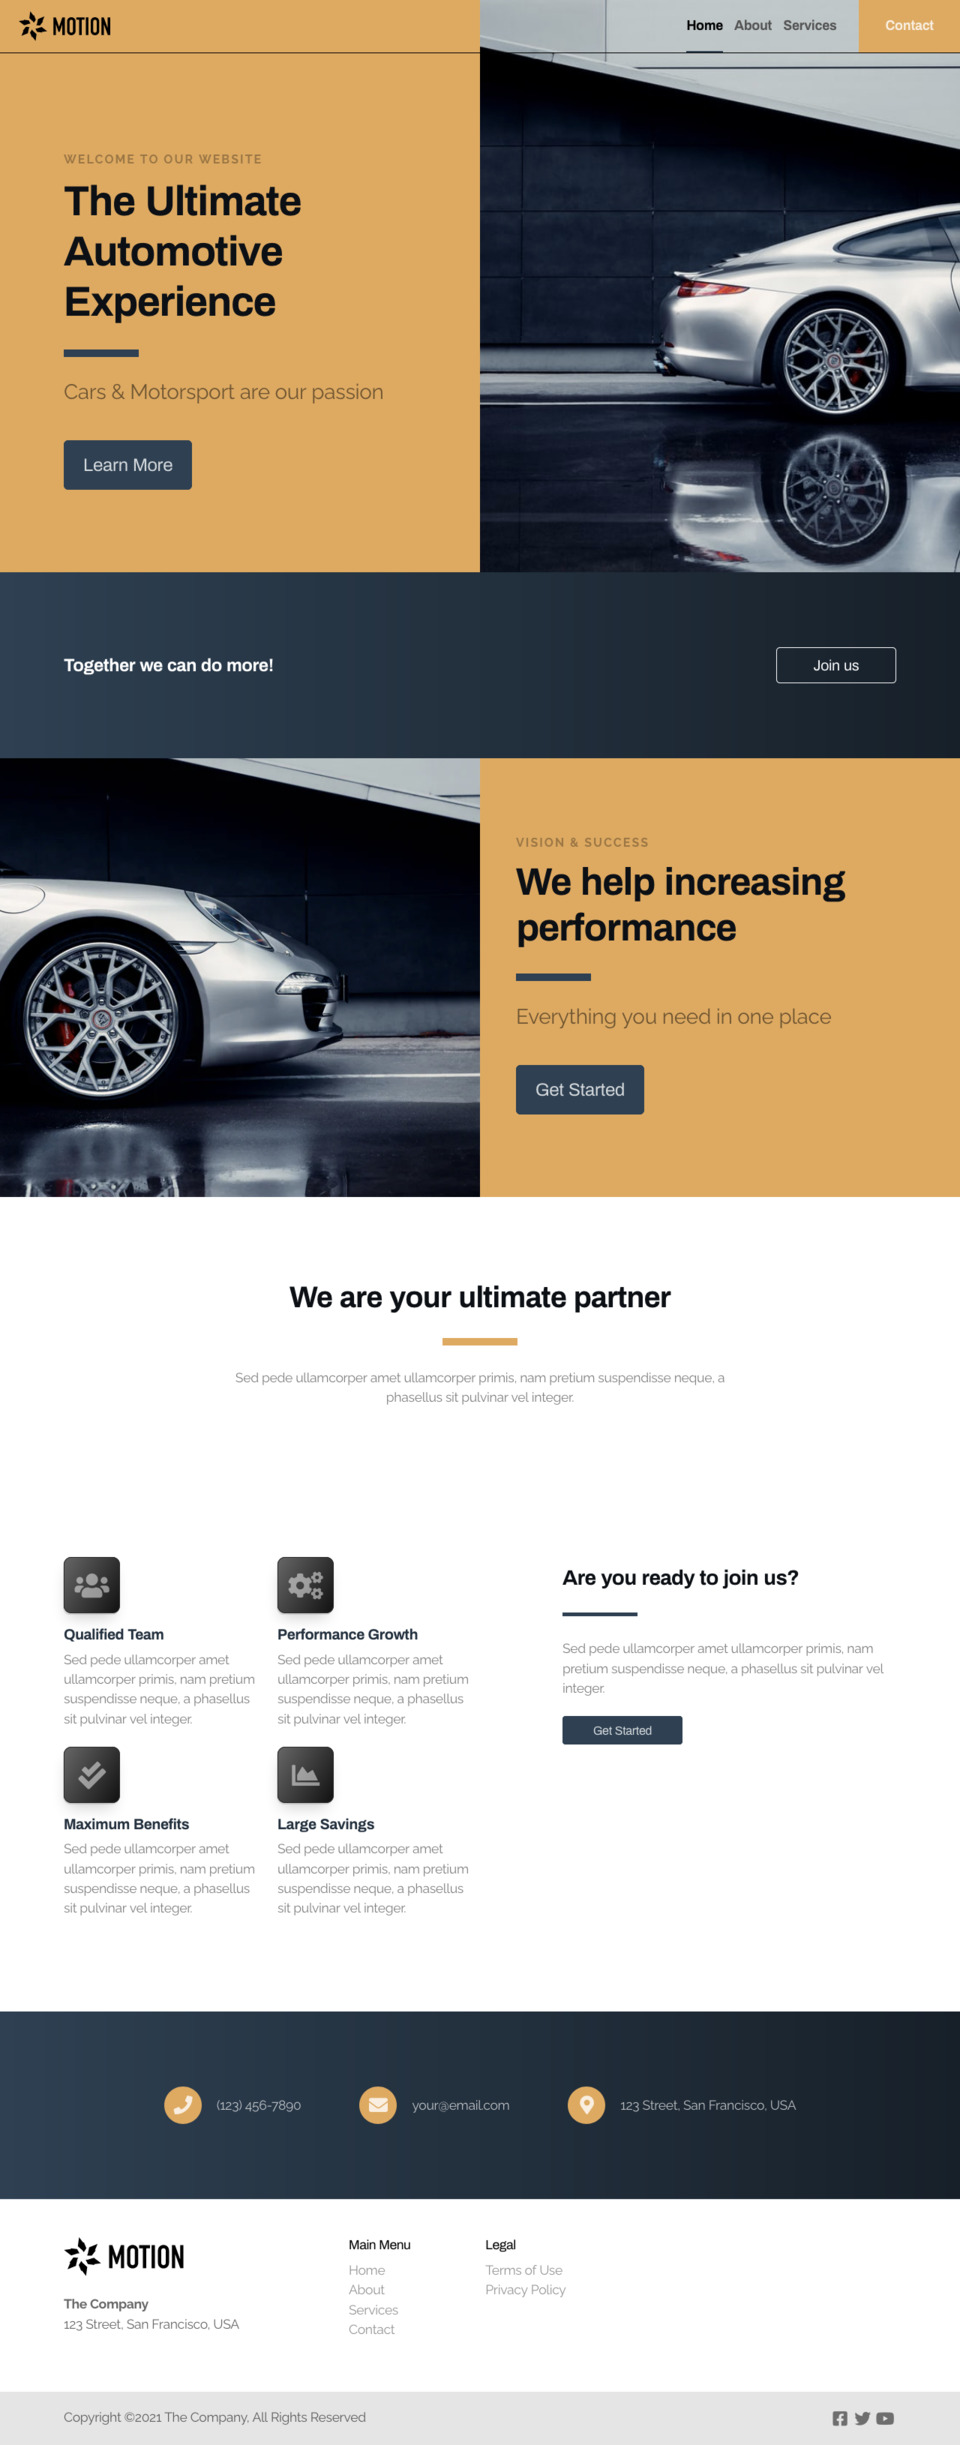 Motion Website Template - Ideal for car enthusiasts, auto dealerships, sports car clubs, automotive designers, and anyone looking to create a visually stunning website.